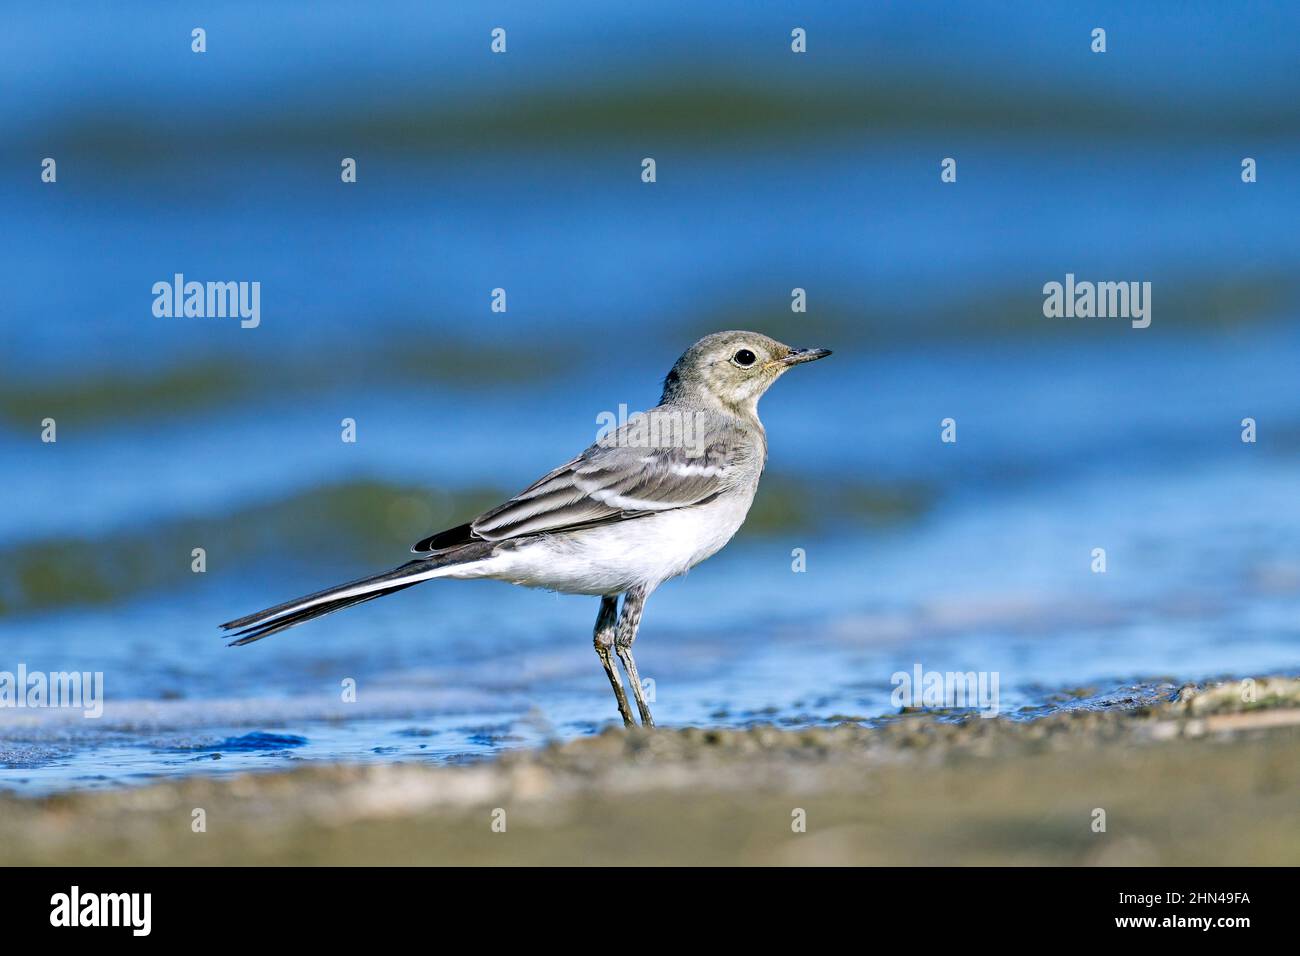 Pied Wagtail, pied White Wagtail (Motacilla alba) immature debout sur une plage. Allemagne Banque D'Images